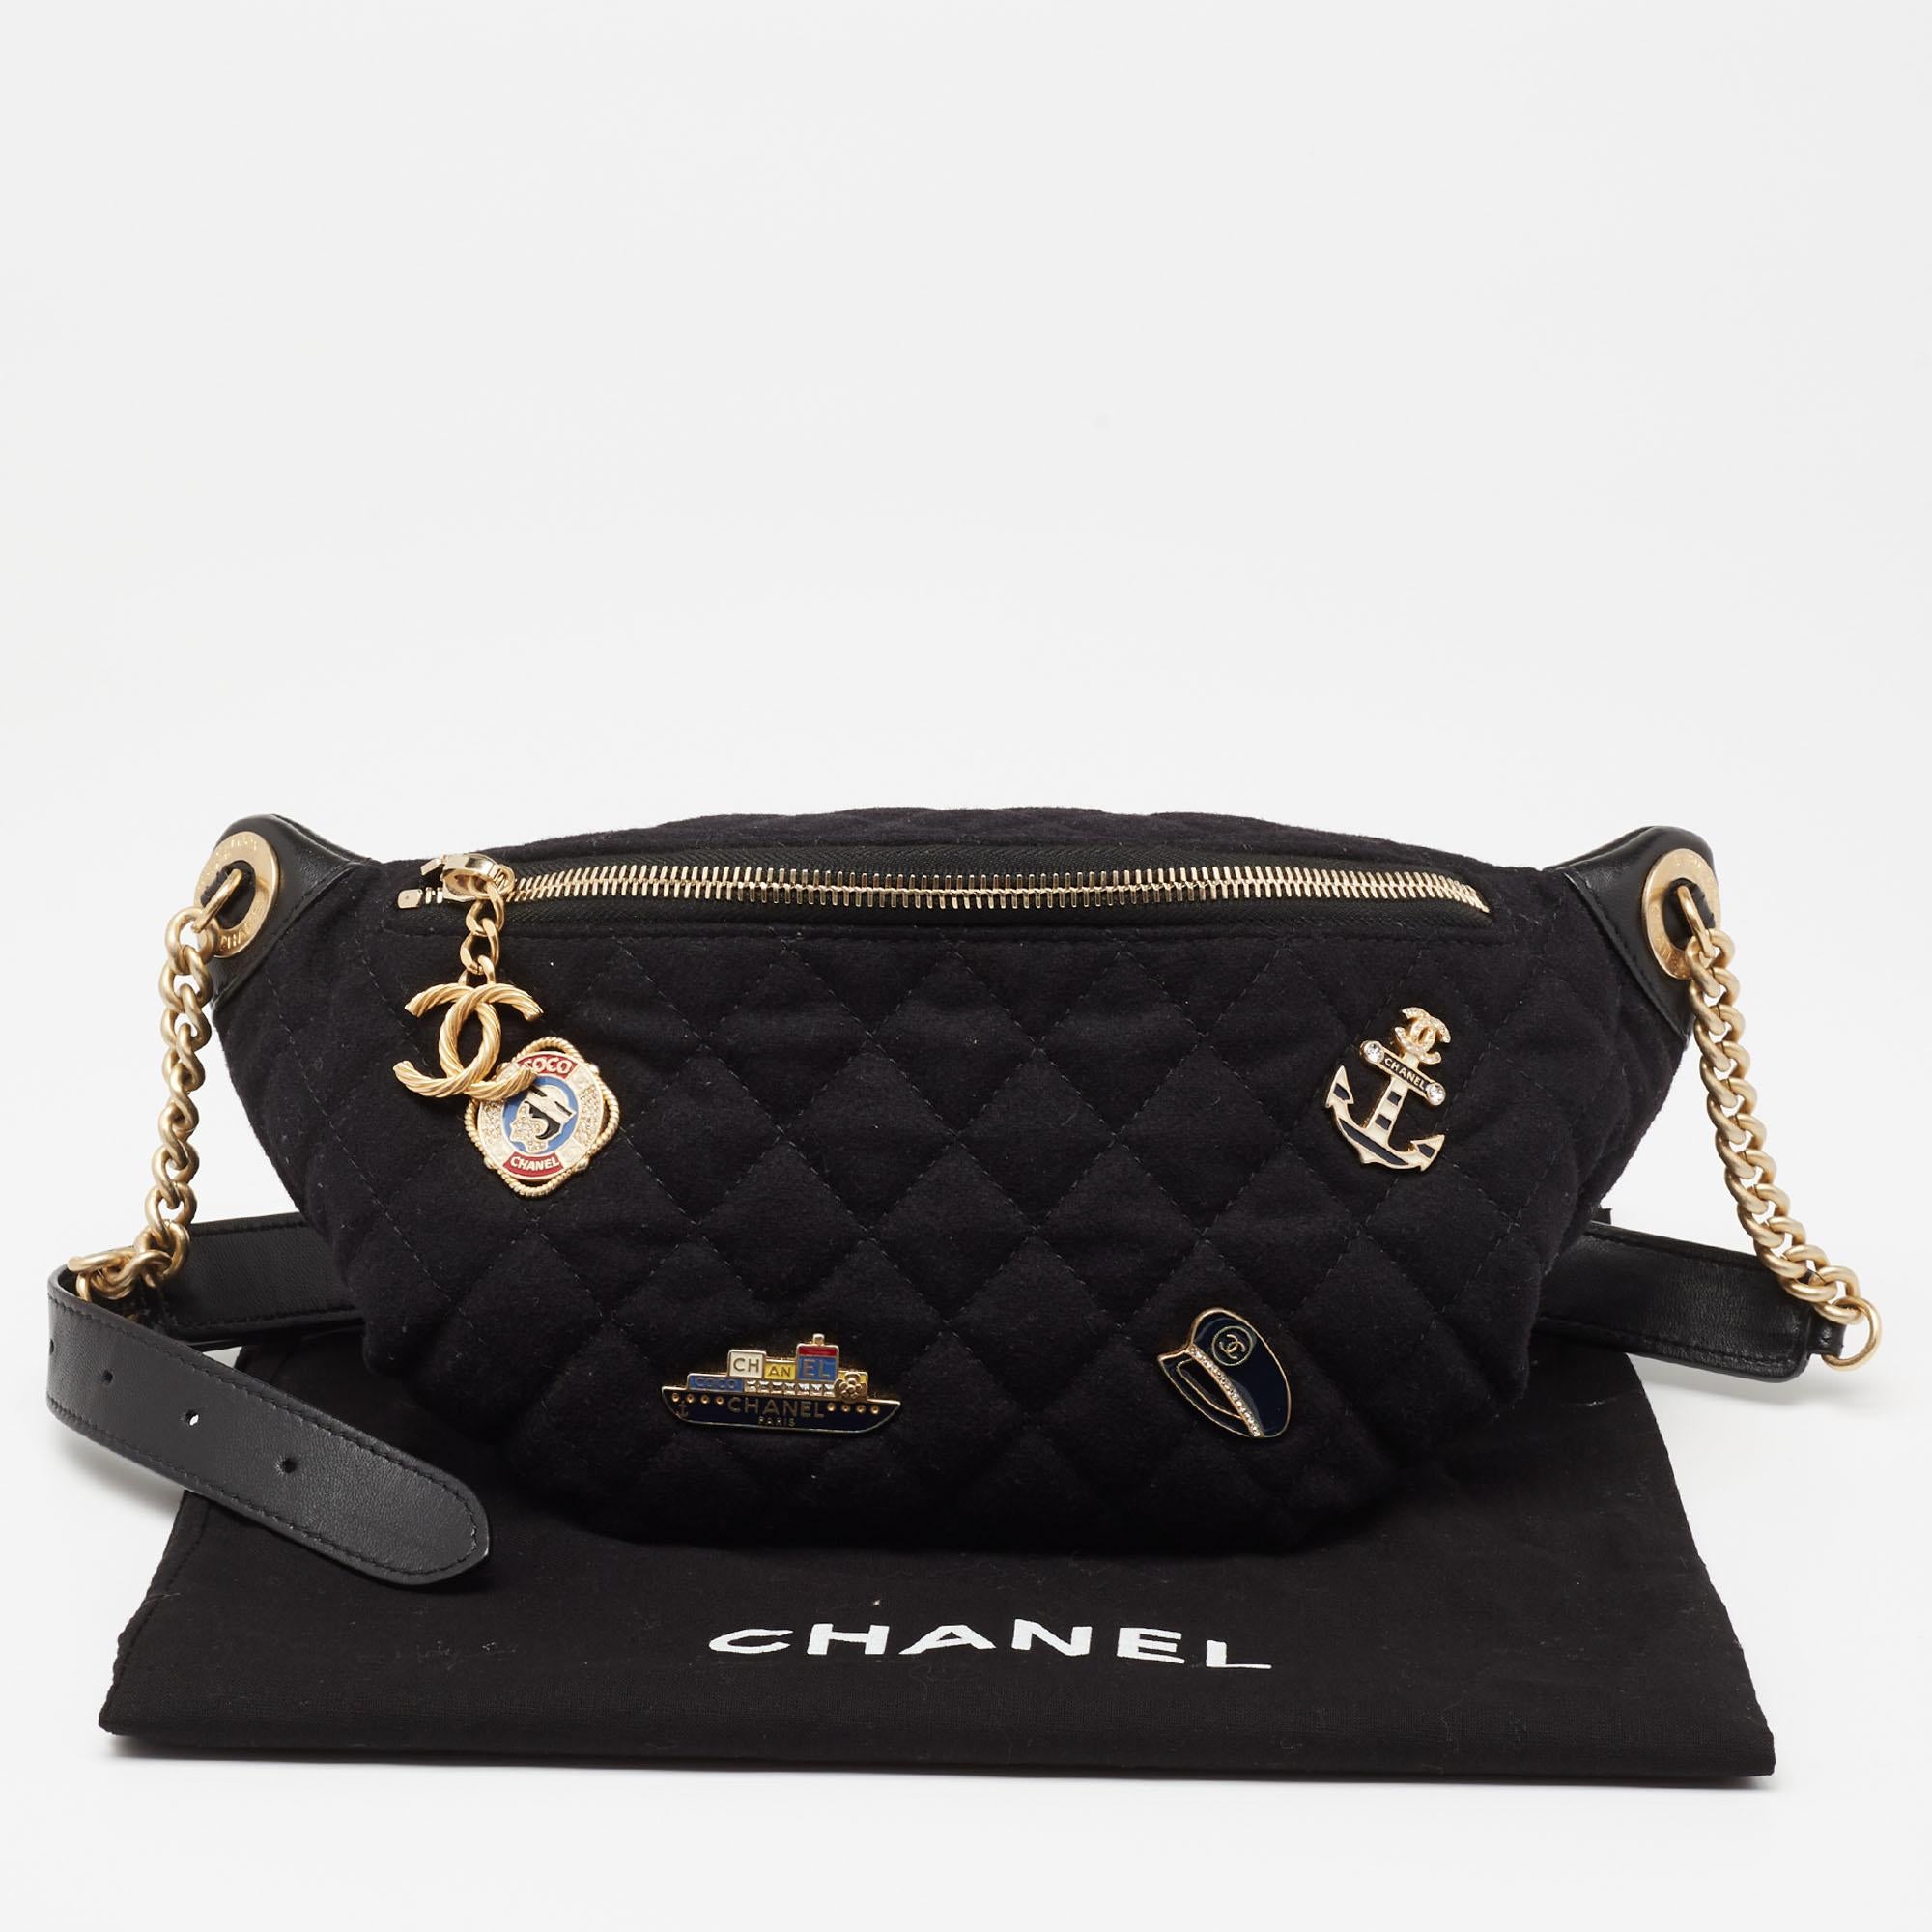 Chanel Black Quilted Fabric and Leather Paris Hamburg Charm Belt Bag 8